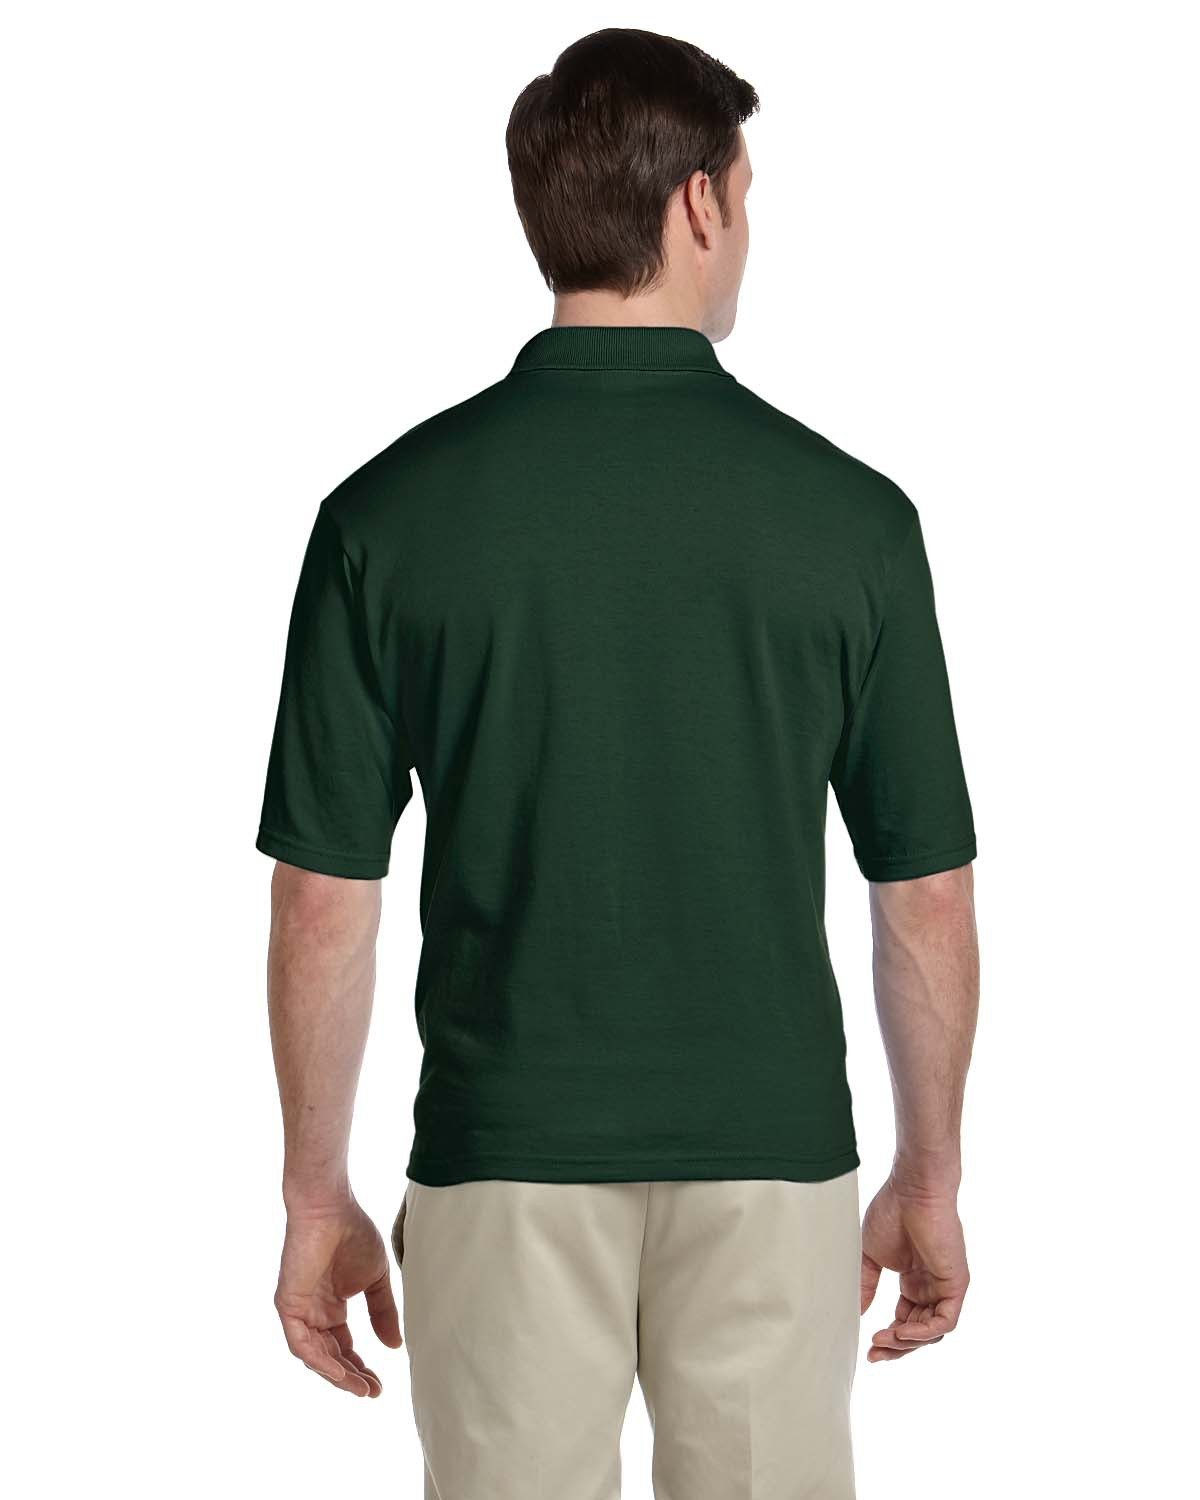 436P-Jerzees-FOREST GREEN-Jerzees-Polos-2